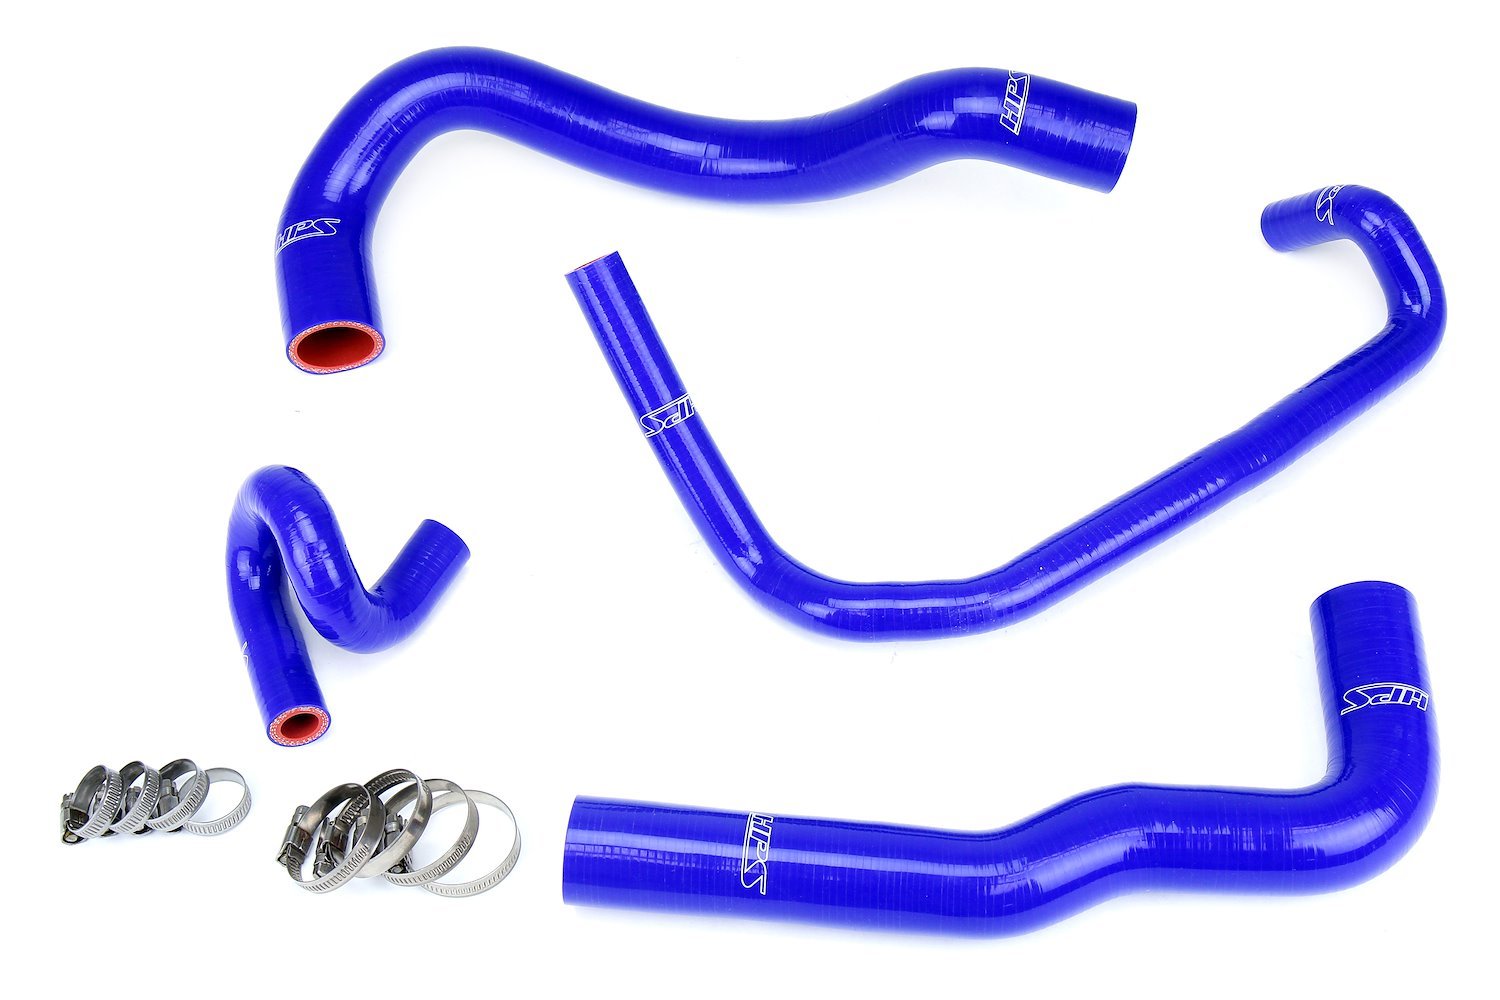 57-1960-BLUE Radiator and Heater Hose Kit, 3-Ply Reinforced Silicone, Replaces Rubber Radiator & Heater Coolant Hoses